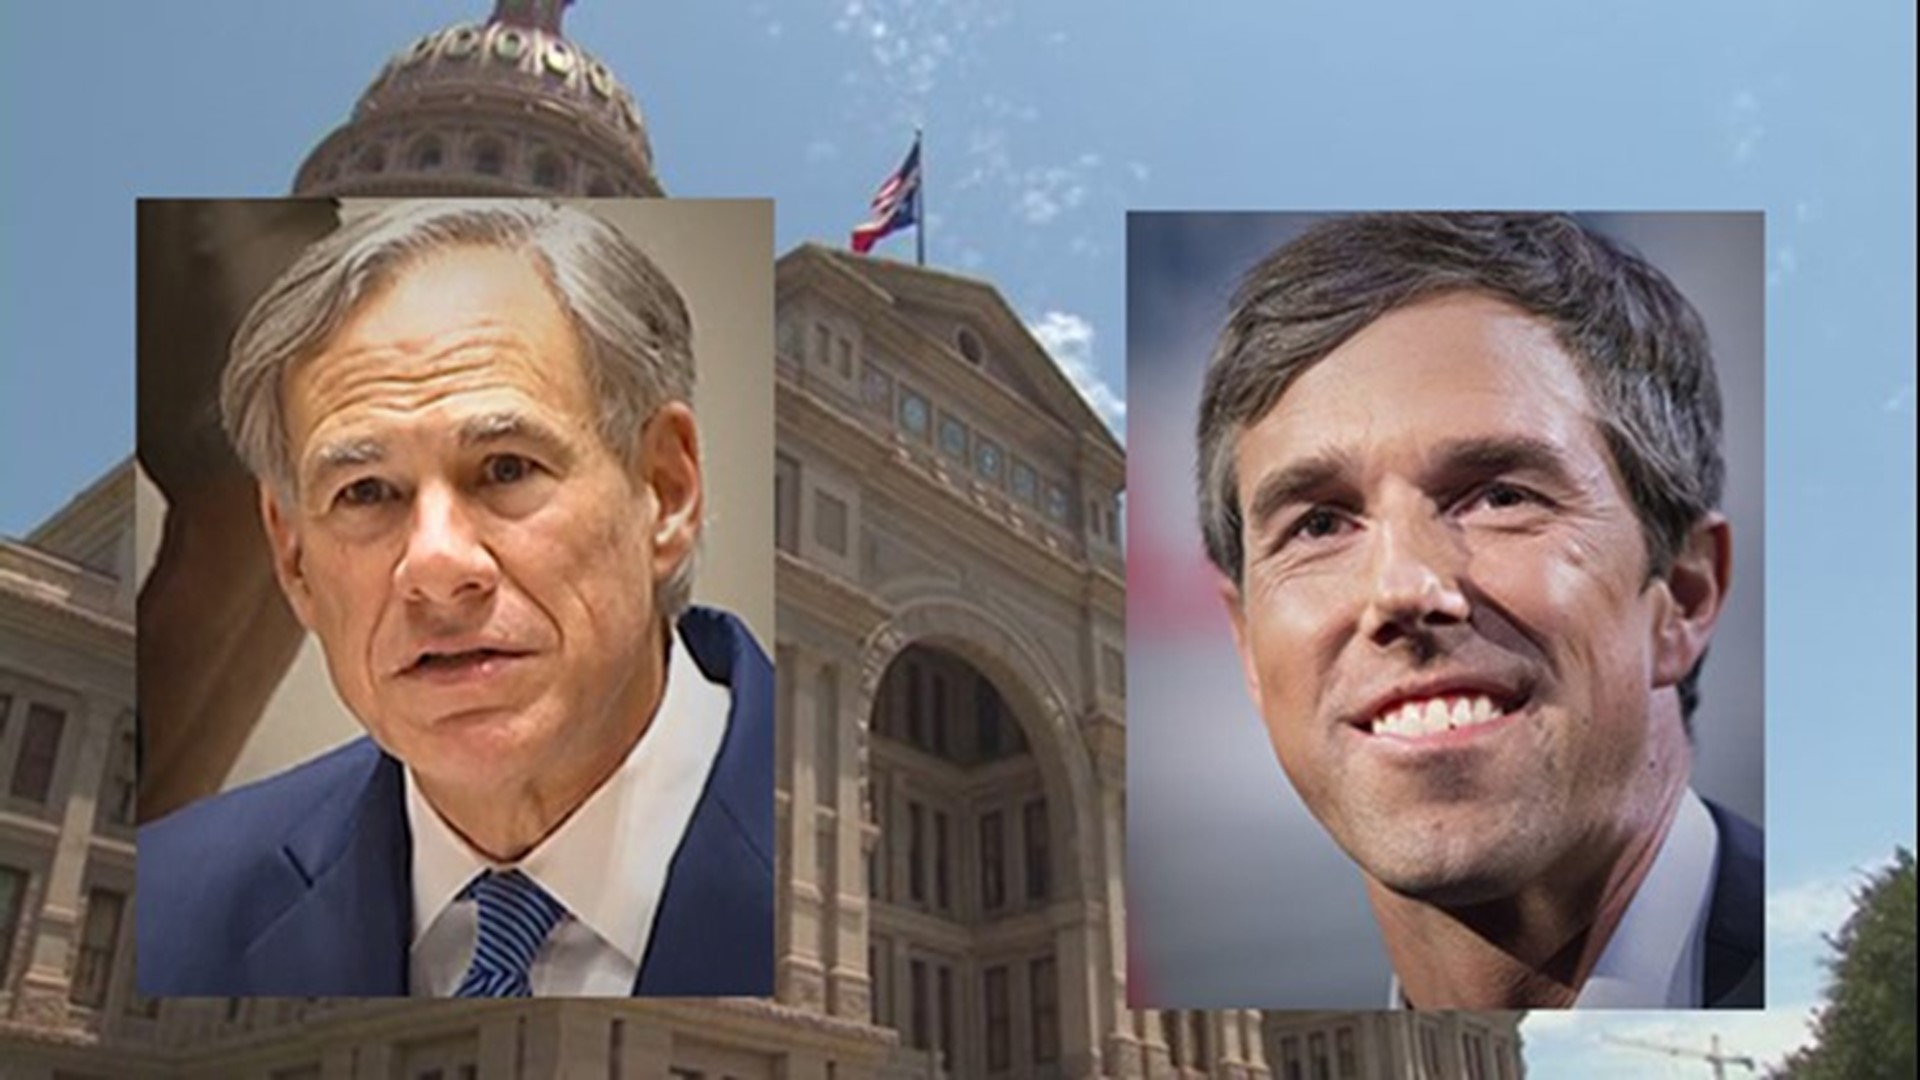 A new Quinnipiac University poll shows that Gov. Greg Abbott’s 15% lead has shrunk to 5% over Beto O’Rourke three weeks after the deadly school shooting.